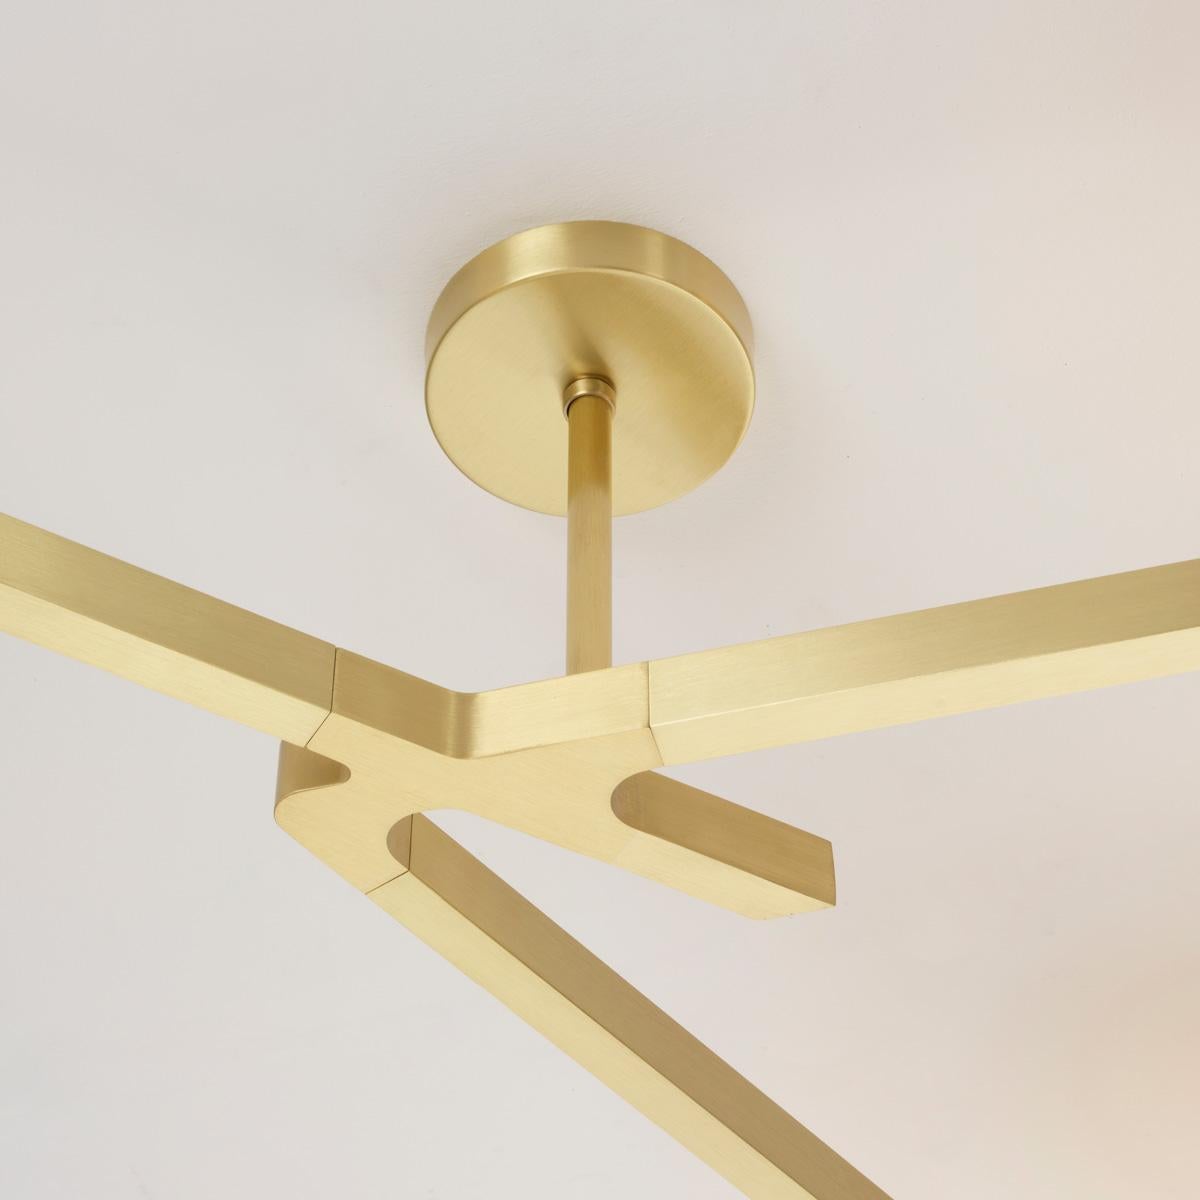 Cuore N.3 Ceiling Light by Gaspare Asaro. Satin Brass and Sand White For Sale 1